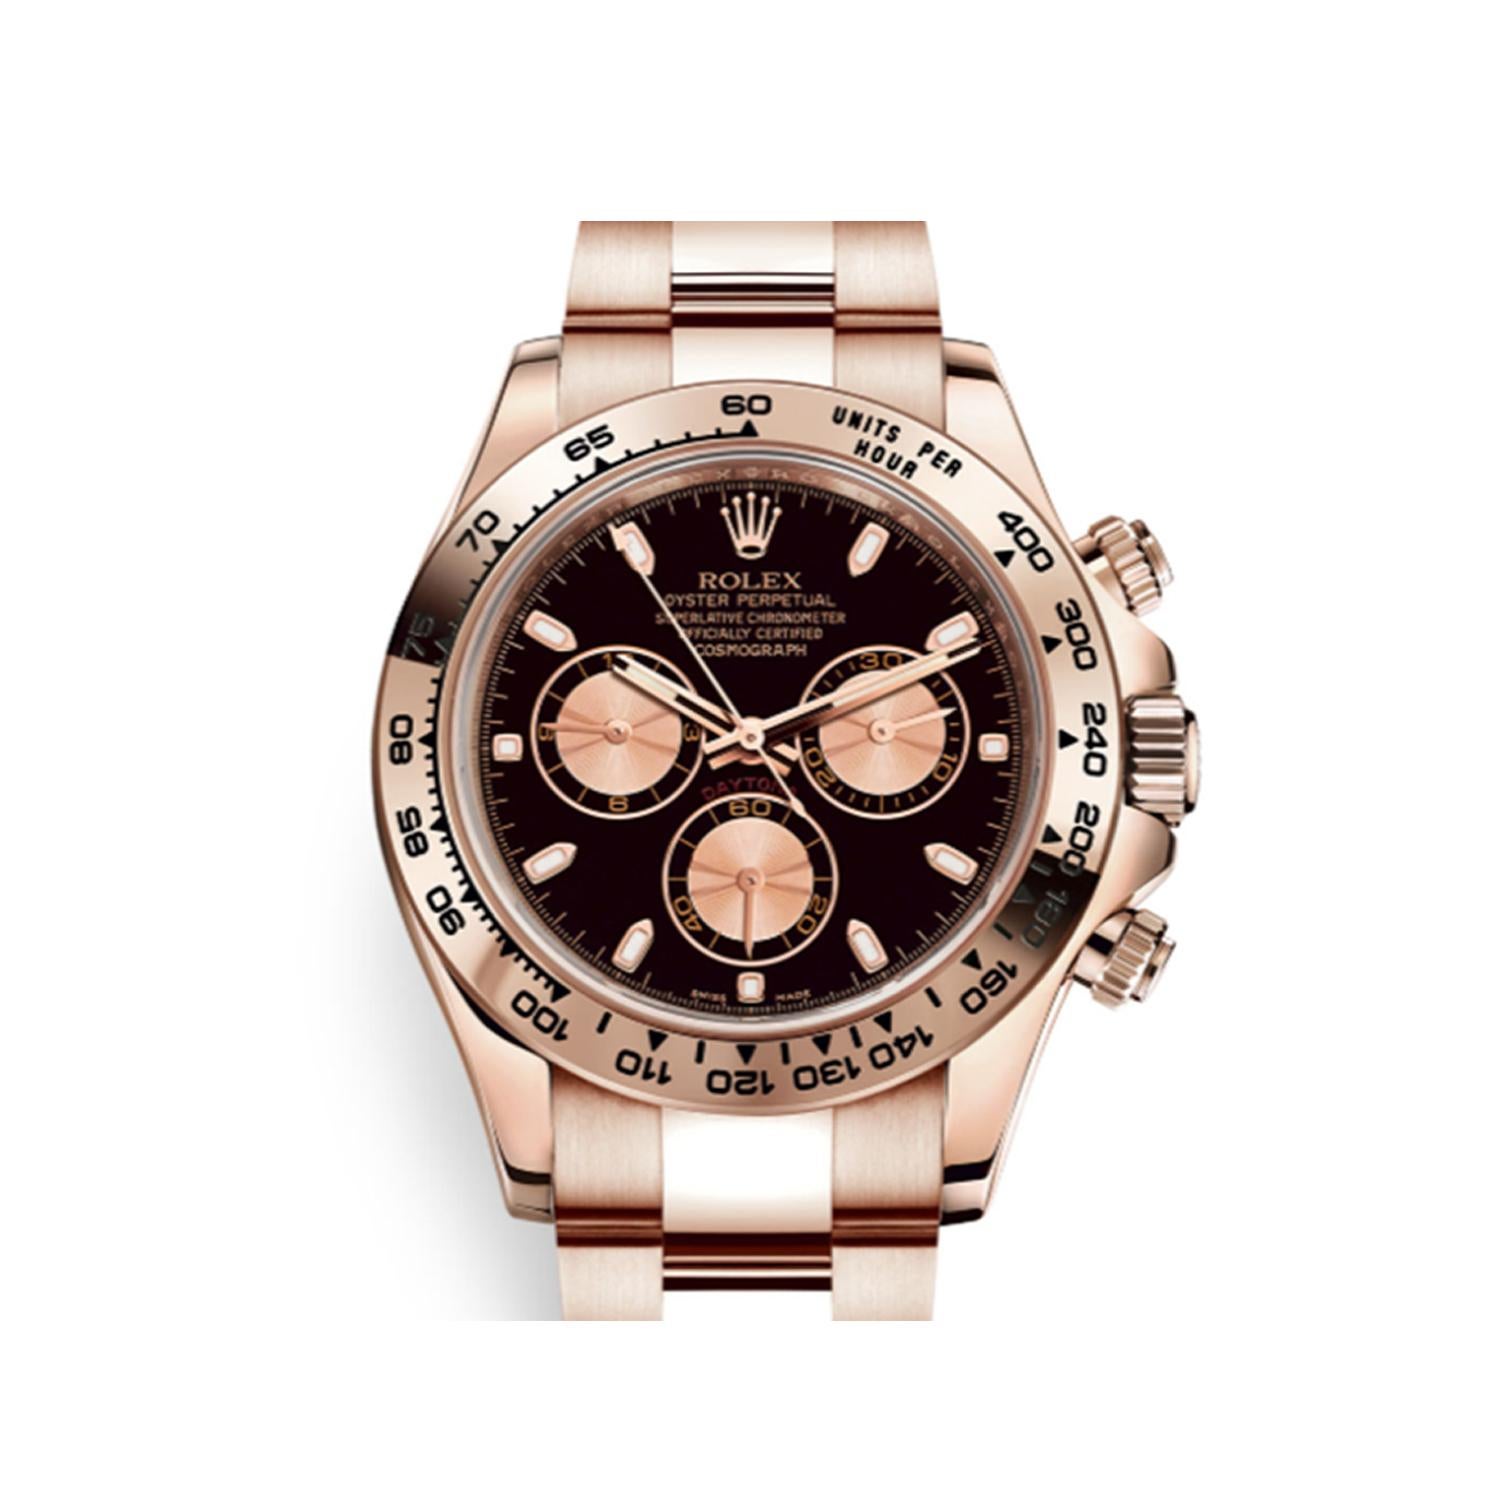 This brand new Rolex Cosmograph Daytona  116505 is a beautiful men's timepiece that is powered by mechanical (automatic) movement which is cased in a rose gold case. It has a round shape face, chronograph, small seconds subdial, tachymeter dial and